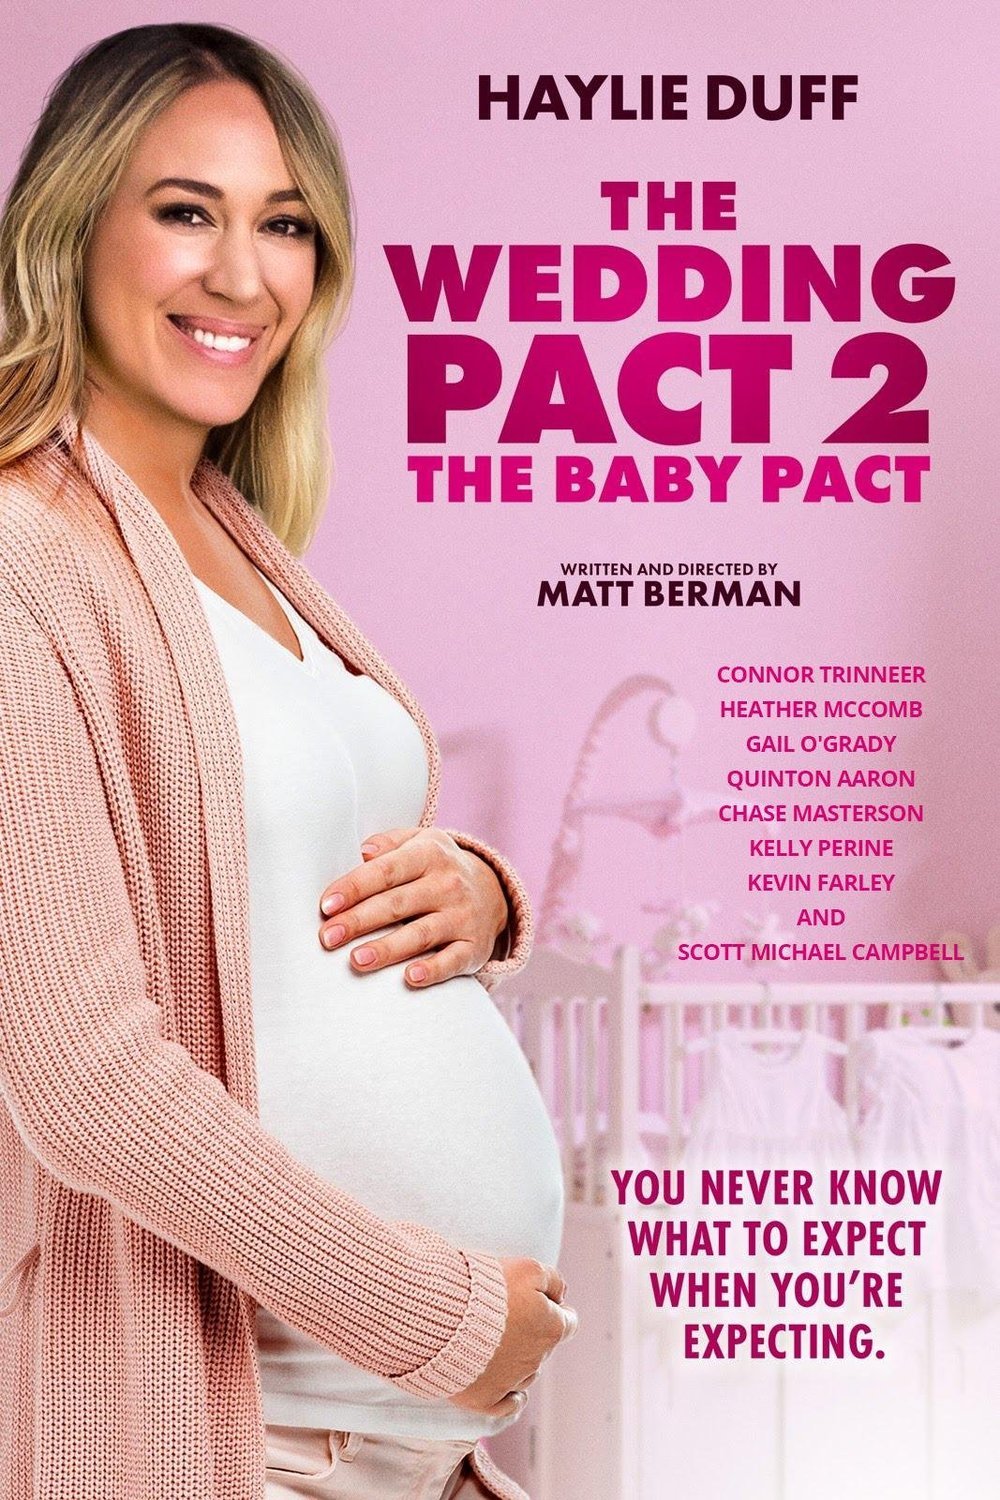 L'affiche du film The Wedding Pact 2: The Baby Pact